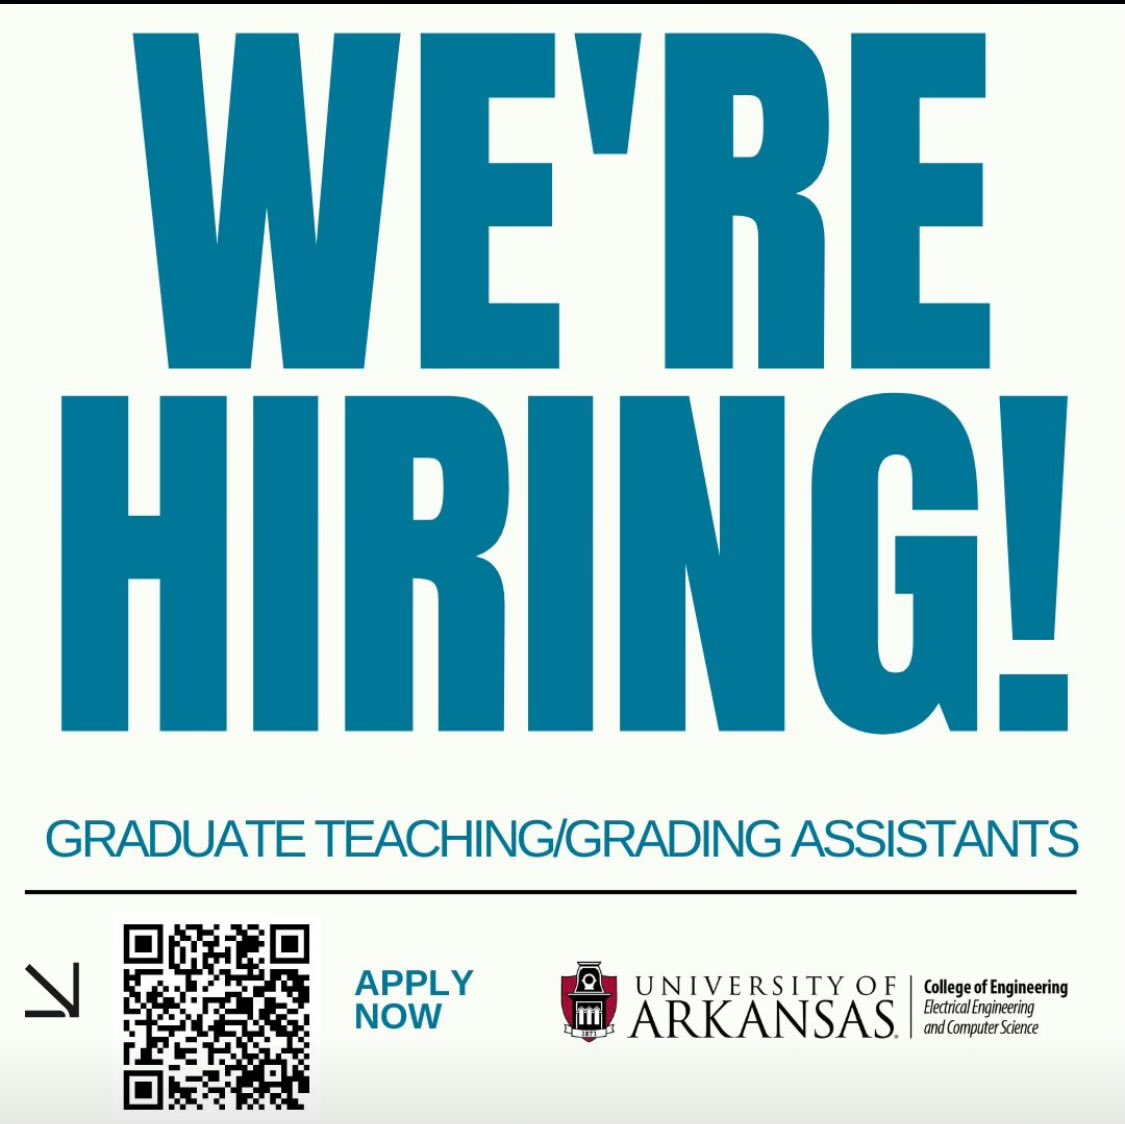 The call for Graduate Teaching & Grading Assistantships is now open! If you’re interested in working for the Department of Electrical Engineering and Computer Science, as a Teaching or Grading Assistant, please submit your Qualtrics application by scanning the QR code